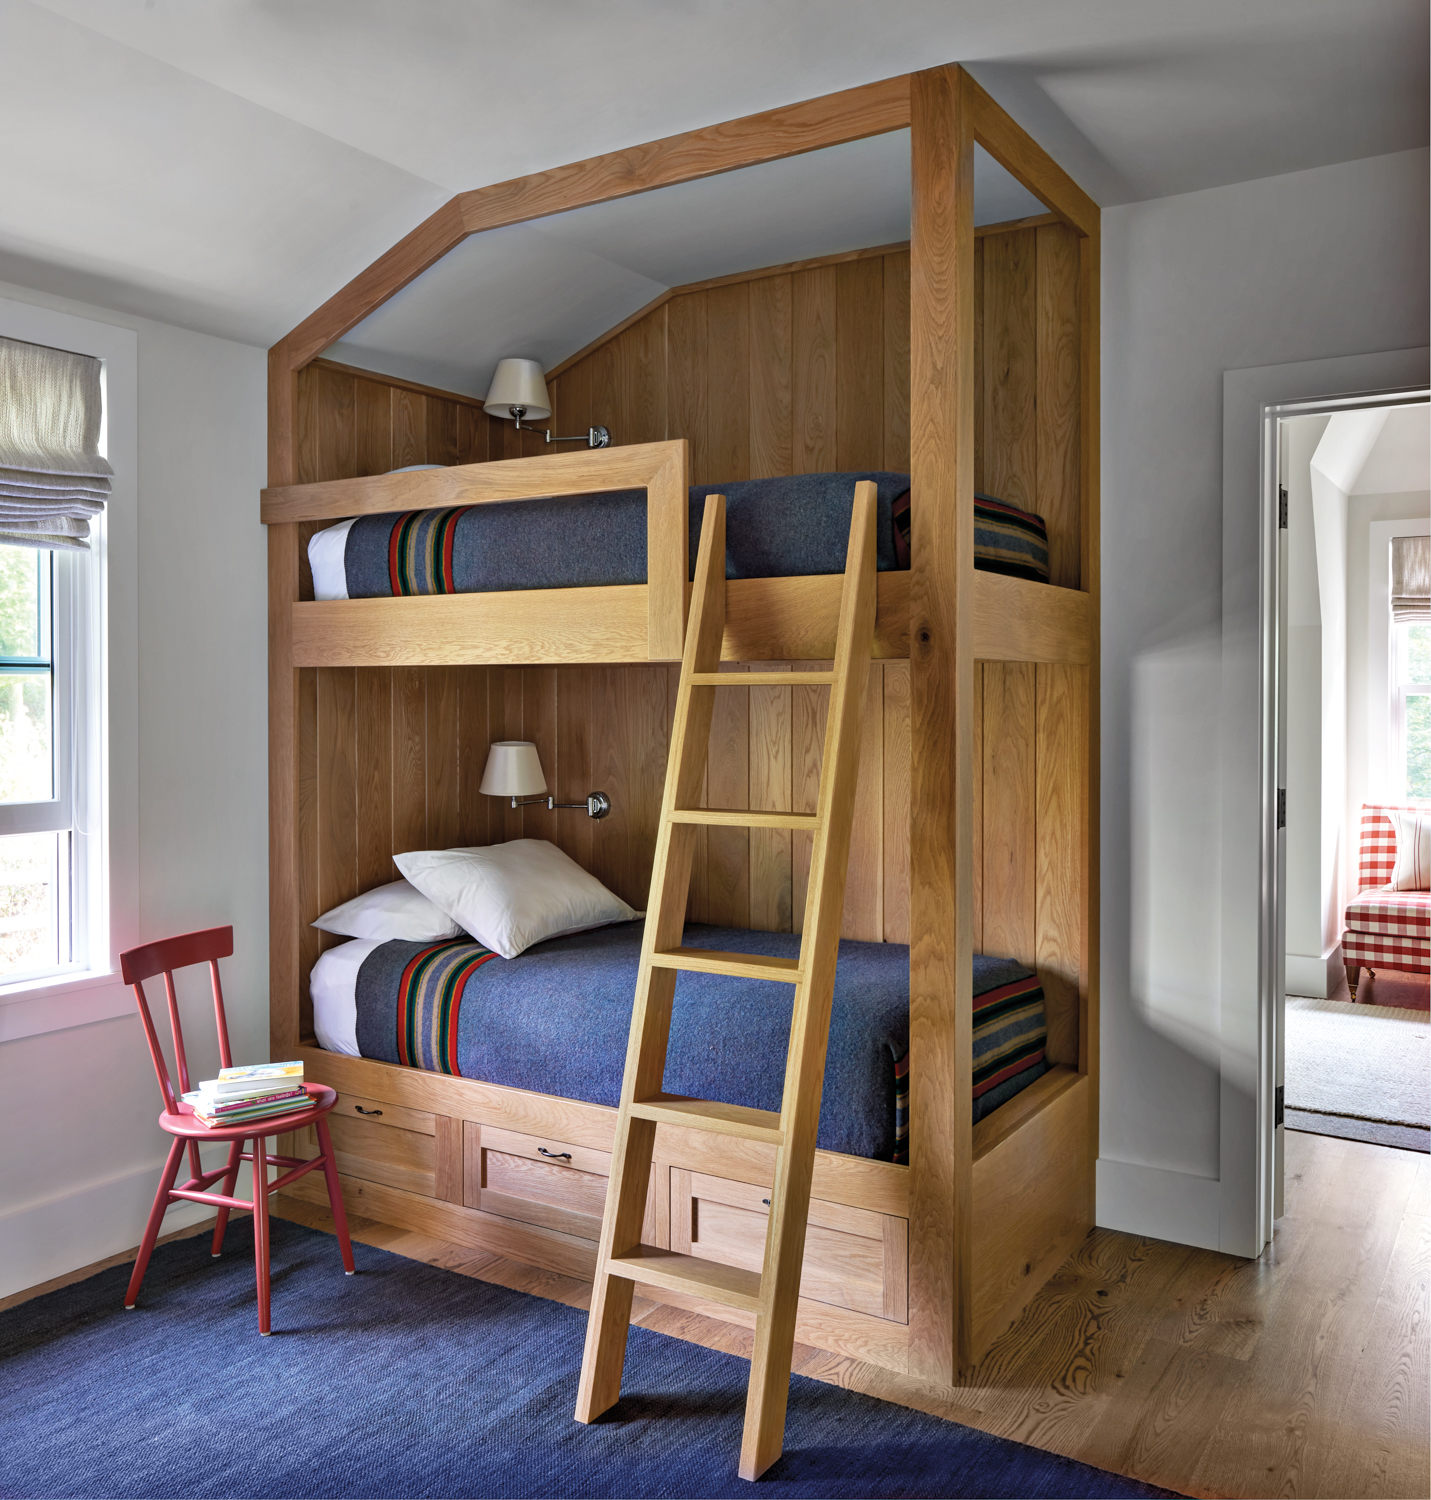 built-in wood bunk beds with...